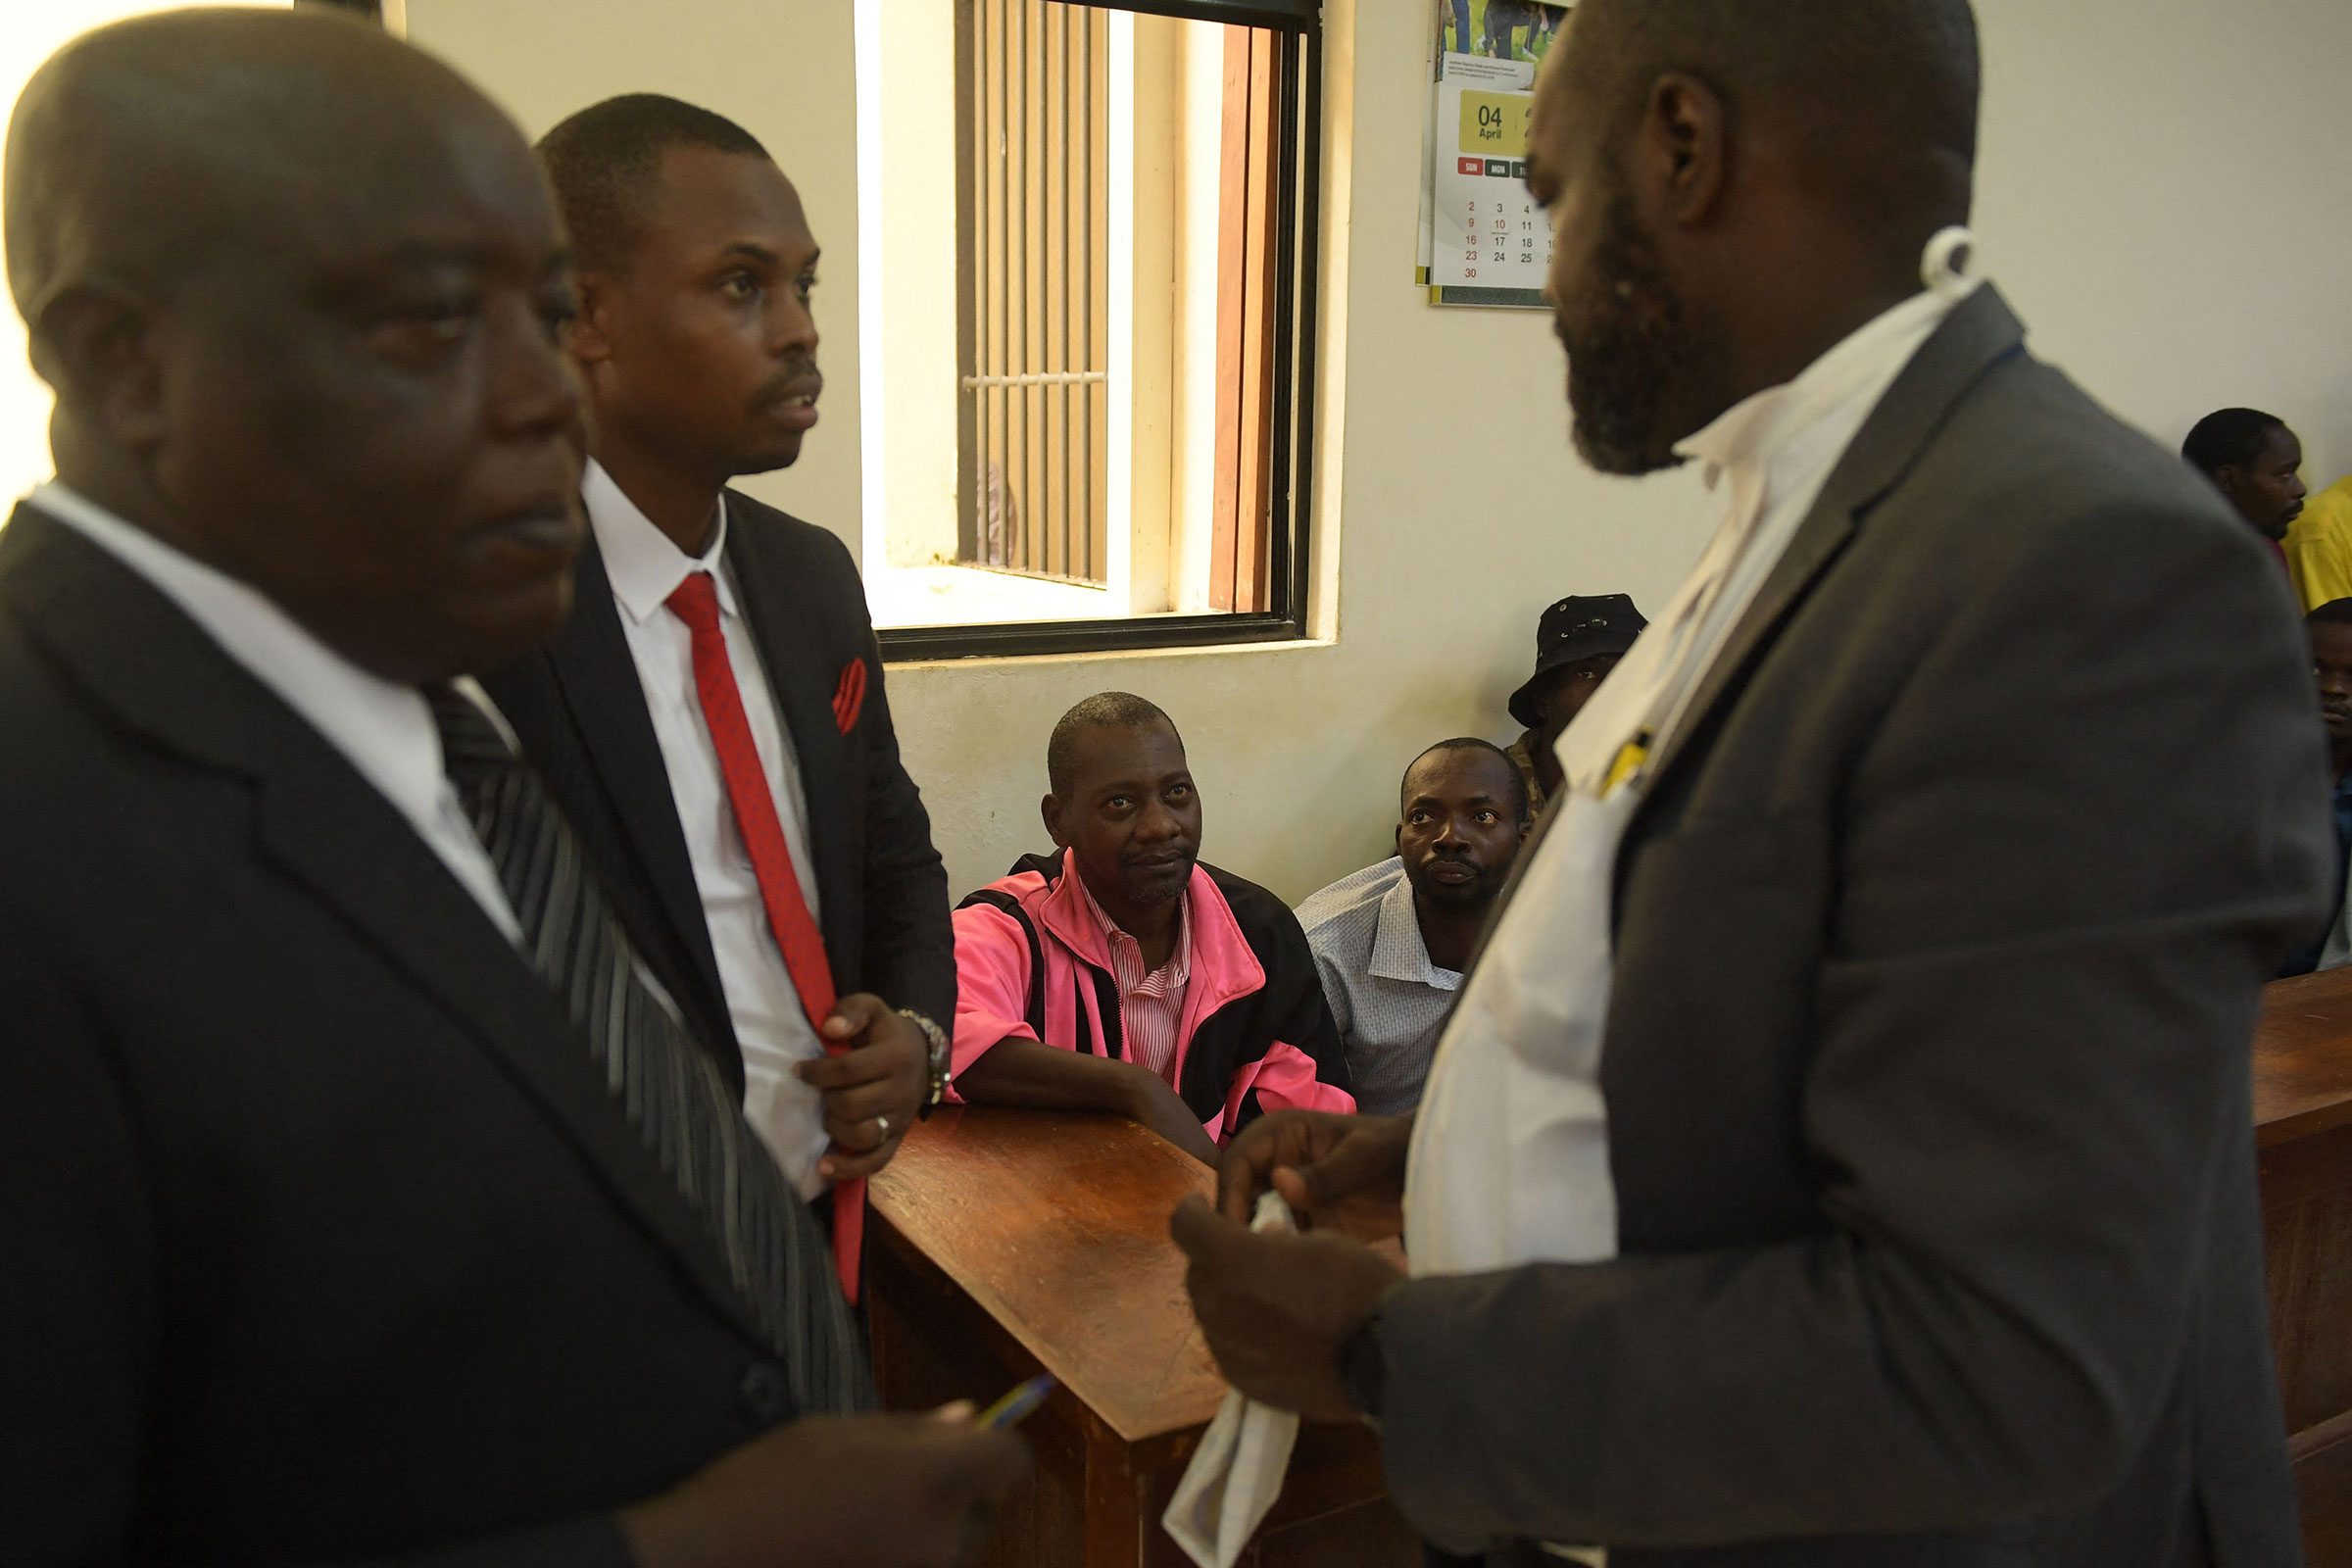 Paul Nthenge Mackenzie looks at his lawyer as he appears in a court